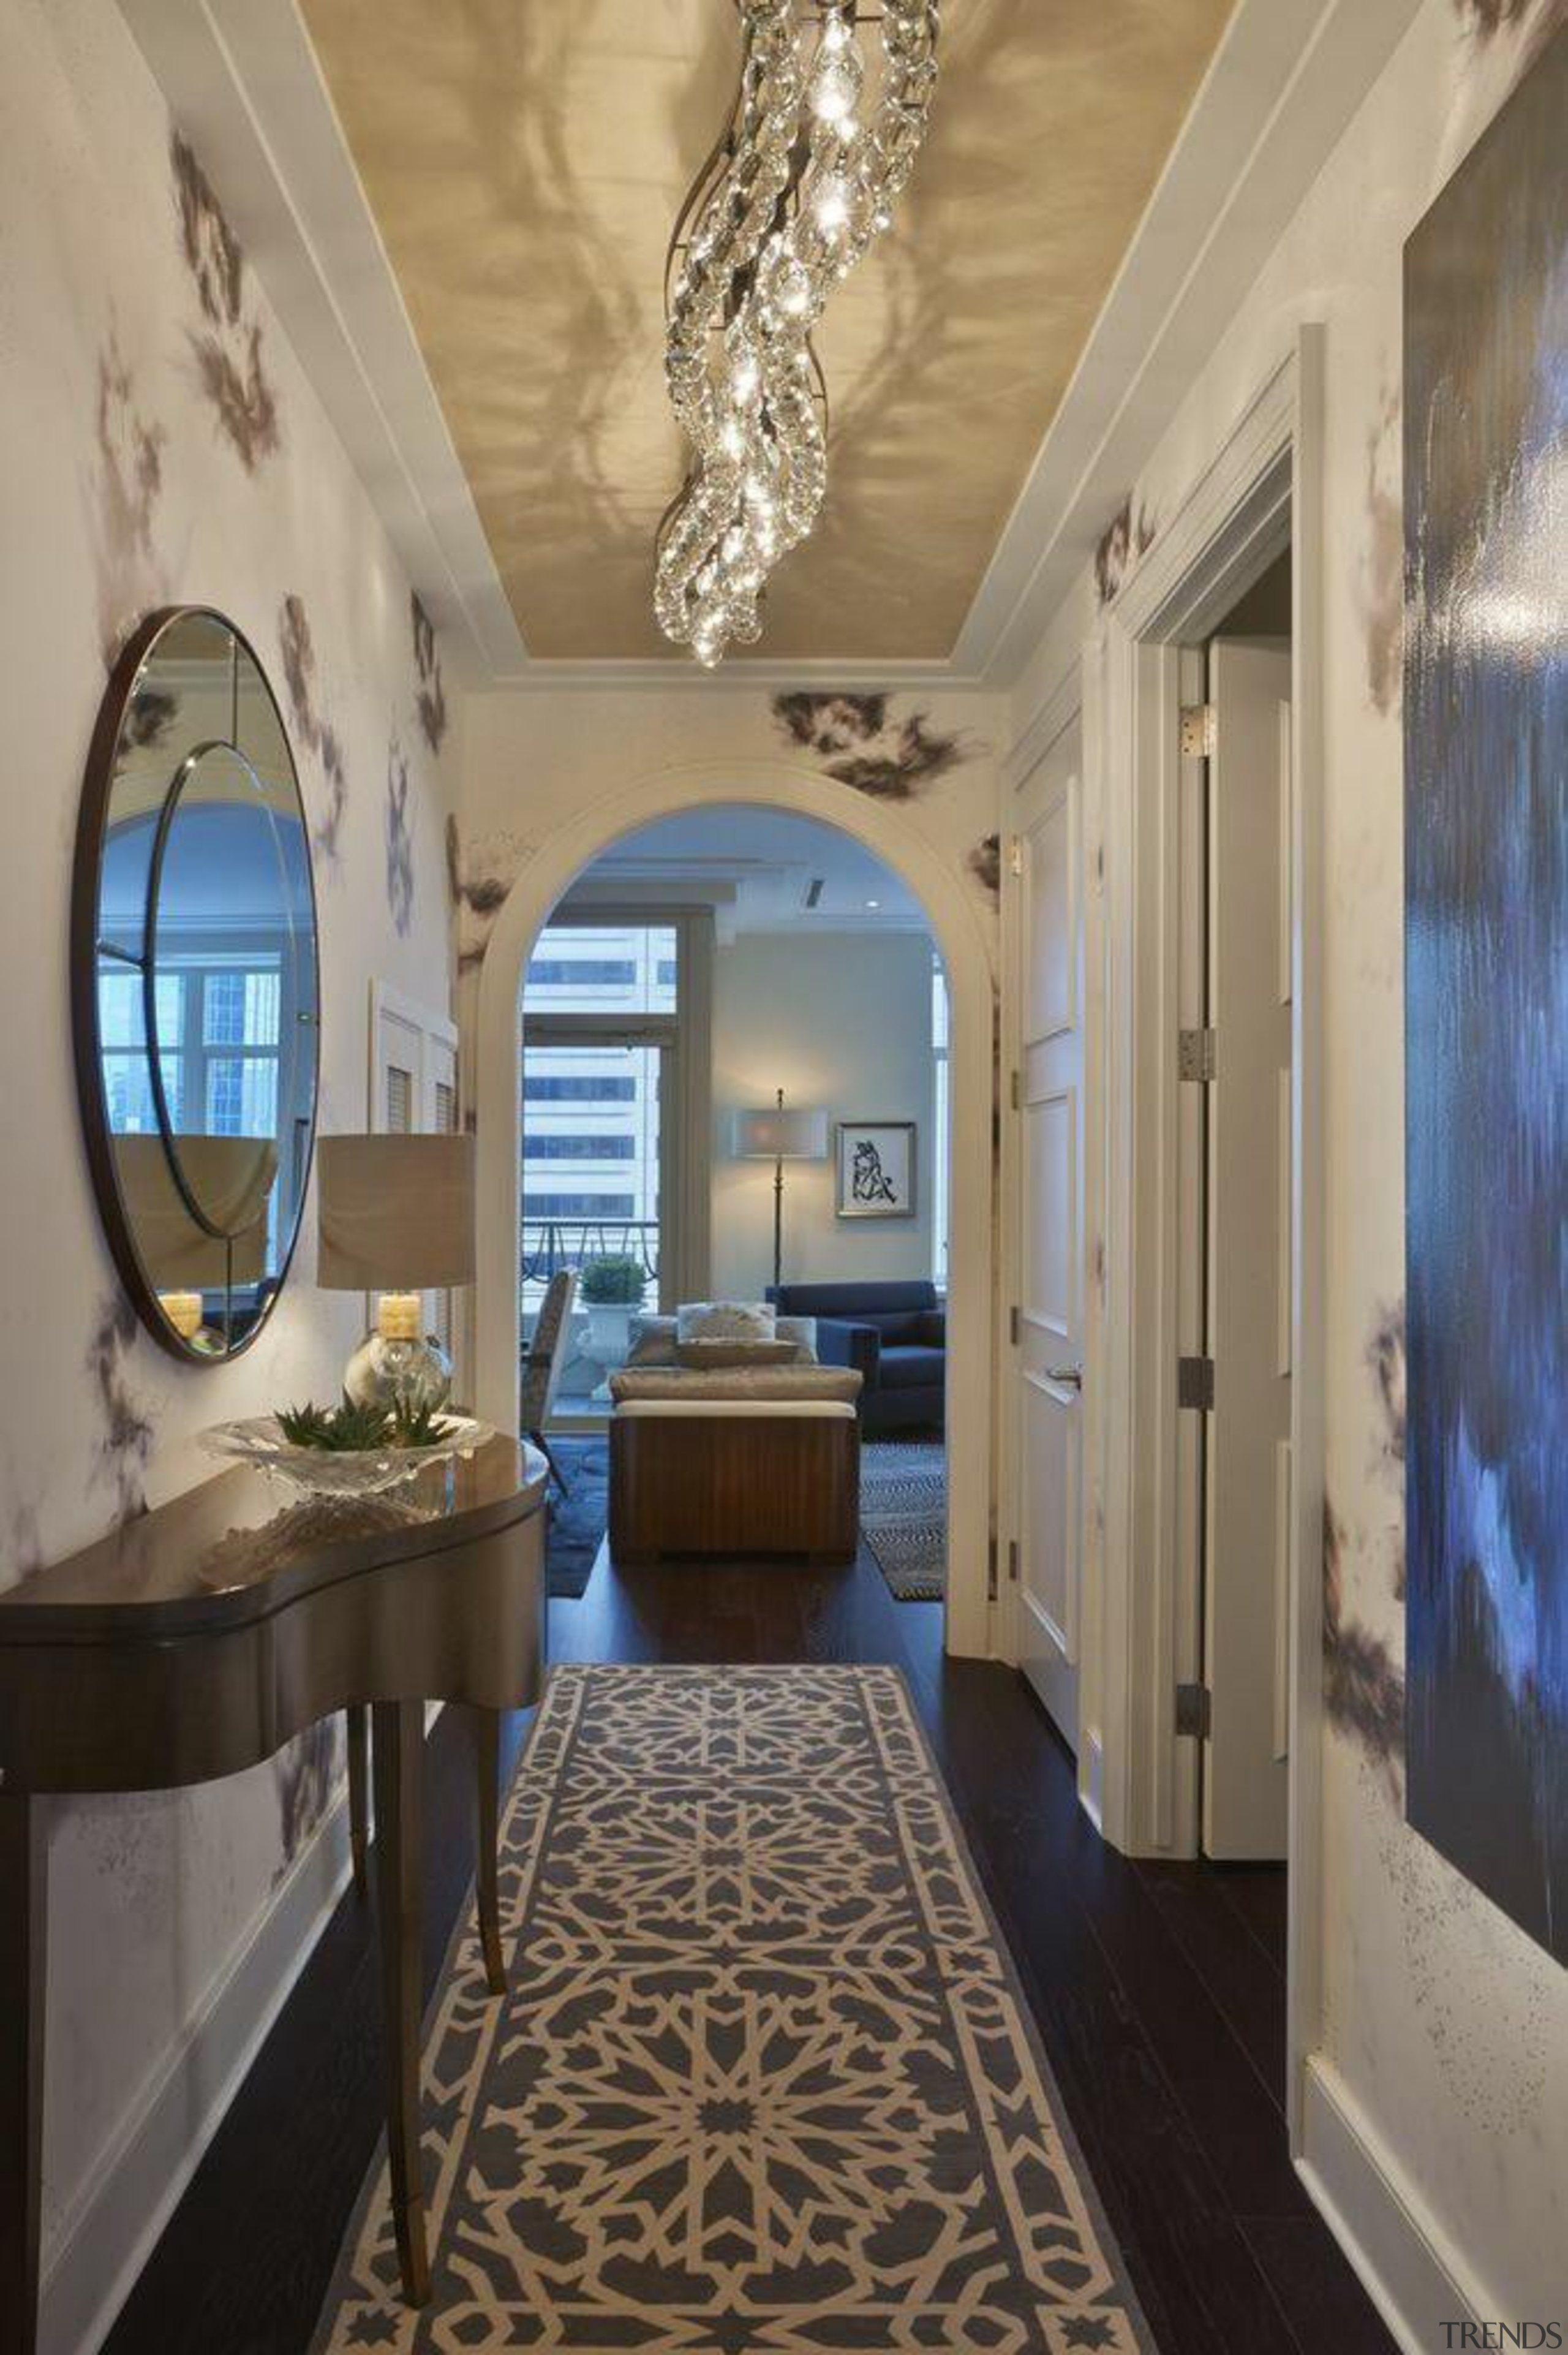 Darling I'm home! This light and airy entry ceiling, countertop, estate, floor, home, interior design, real estate, room, wall